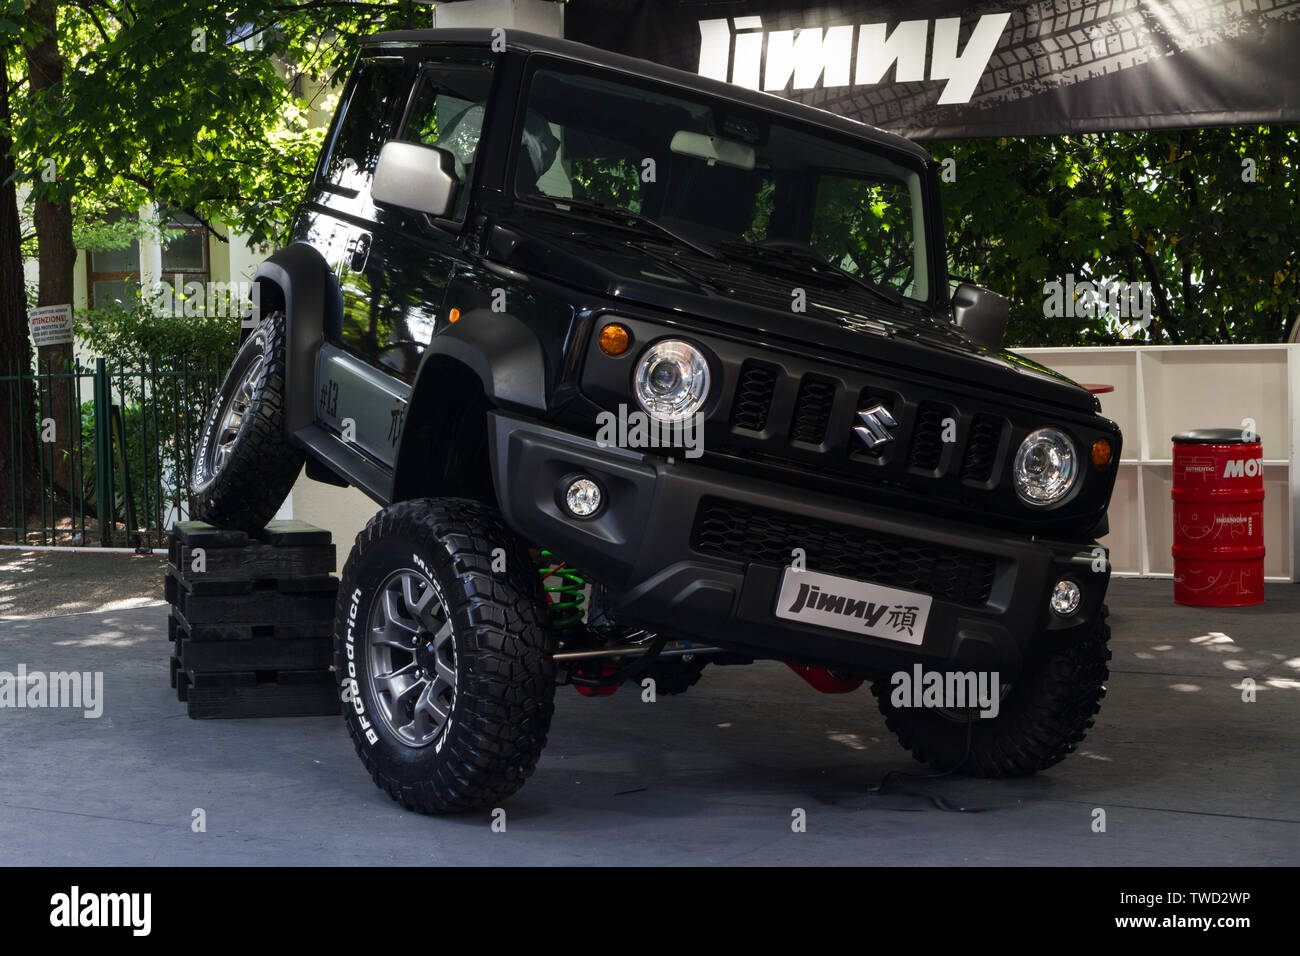 A black Suzuki Jimny GAN. 2019 edition of Parco Valentino car show hosts cars by many brands and car designers in Valentino Park in Torino, Italy. Stock Photo